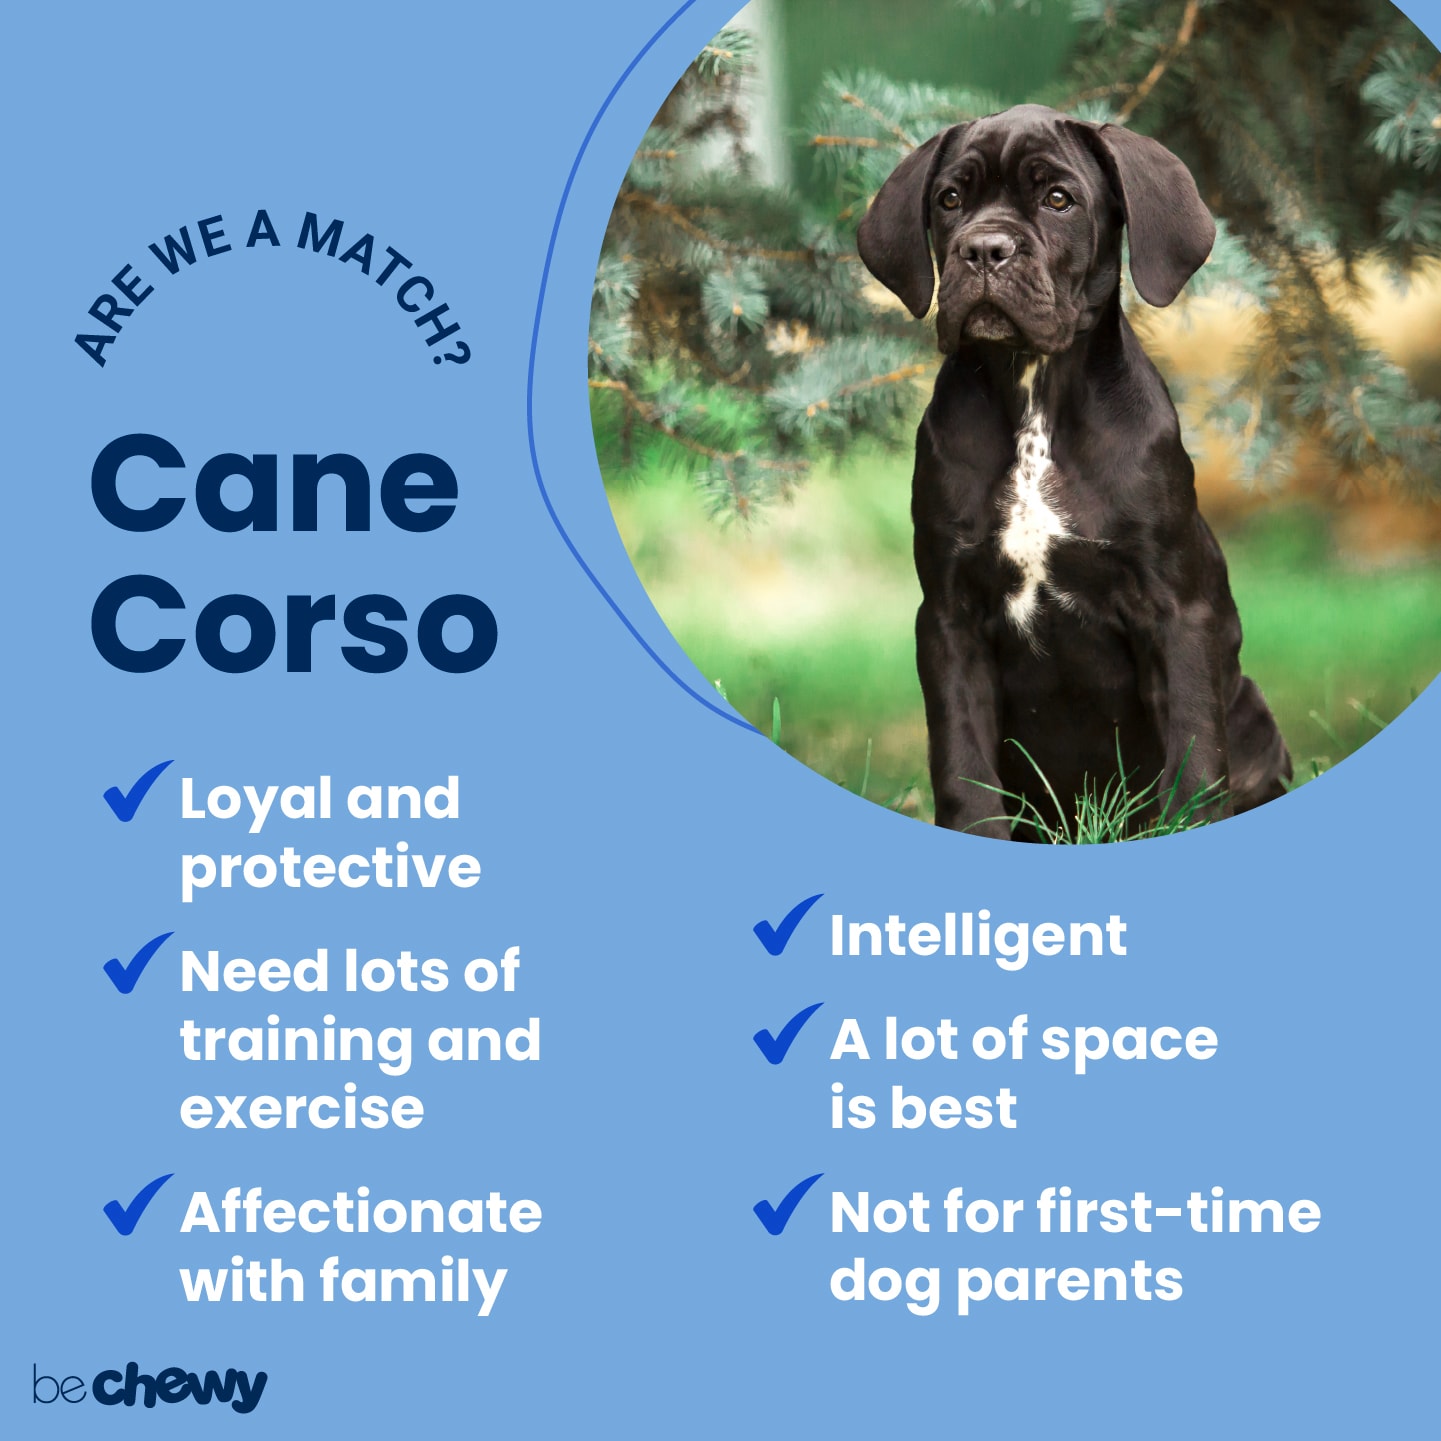 Cane Corso Dog Breed Details - My Dog's Name